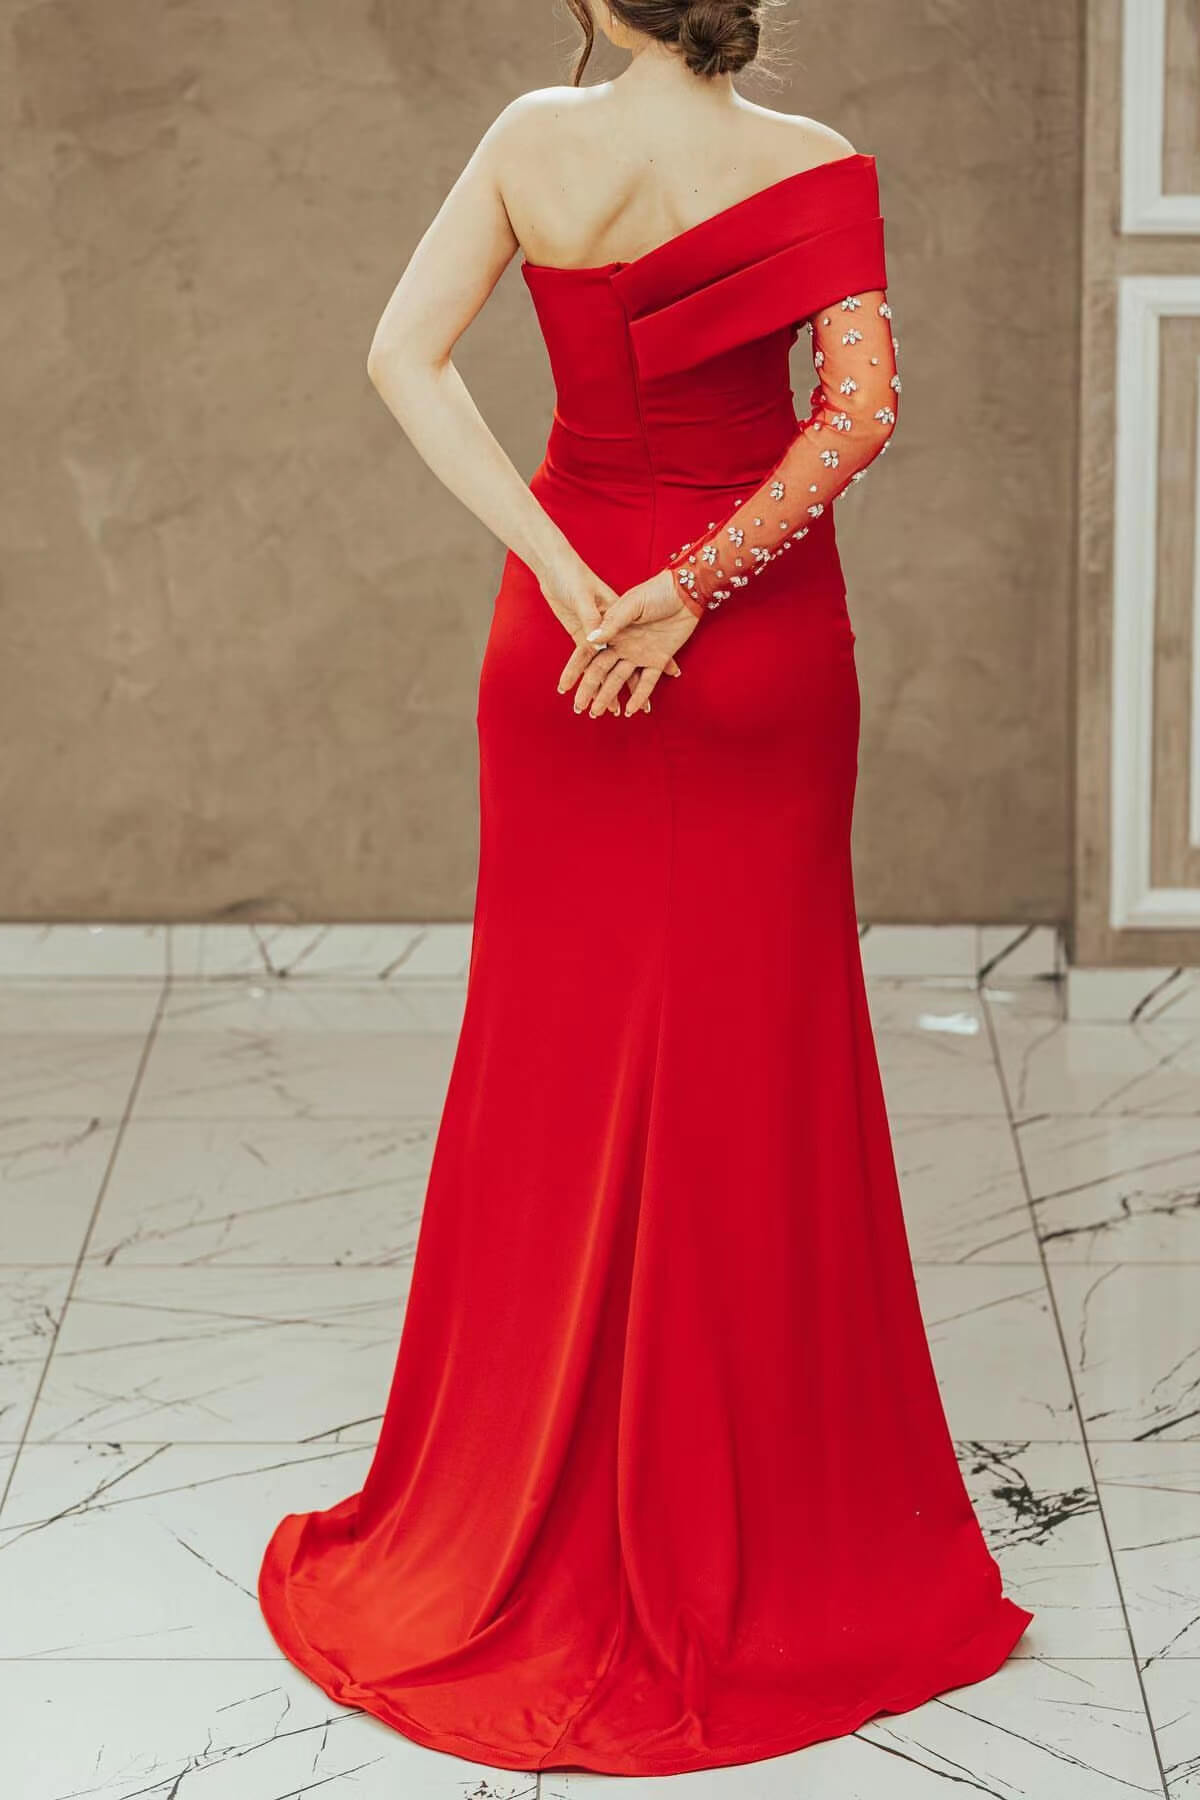 Sizzling Scarlet One-Shoulder Mermaid Prom Gown with Dazzling Bead Embellishments